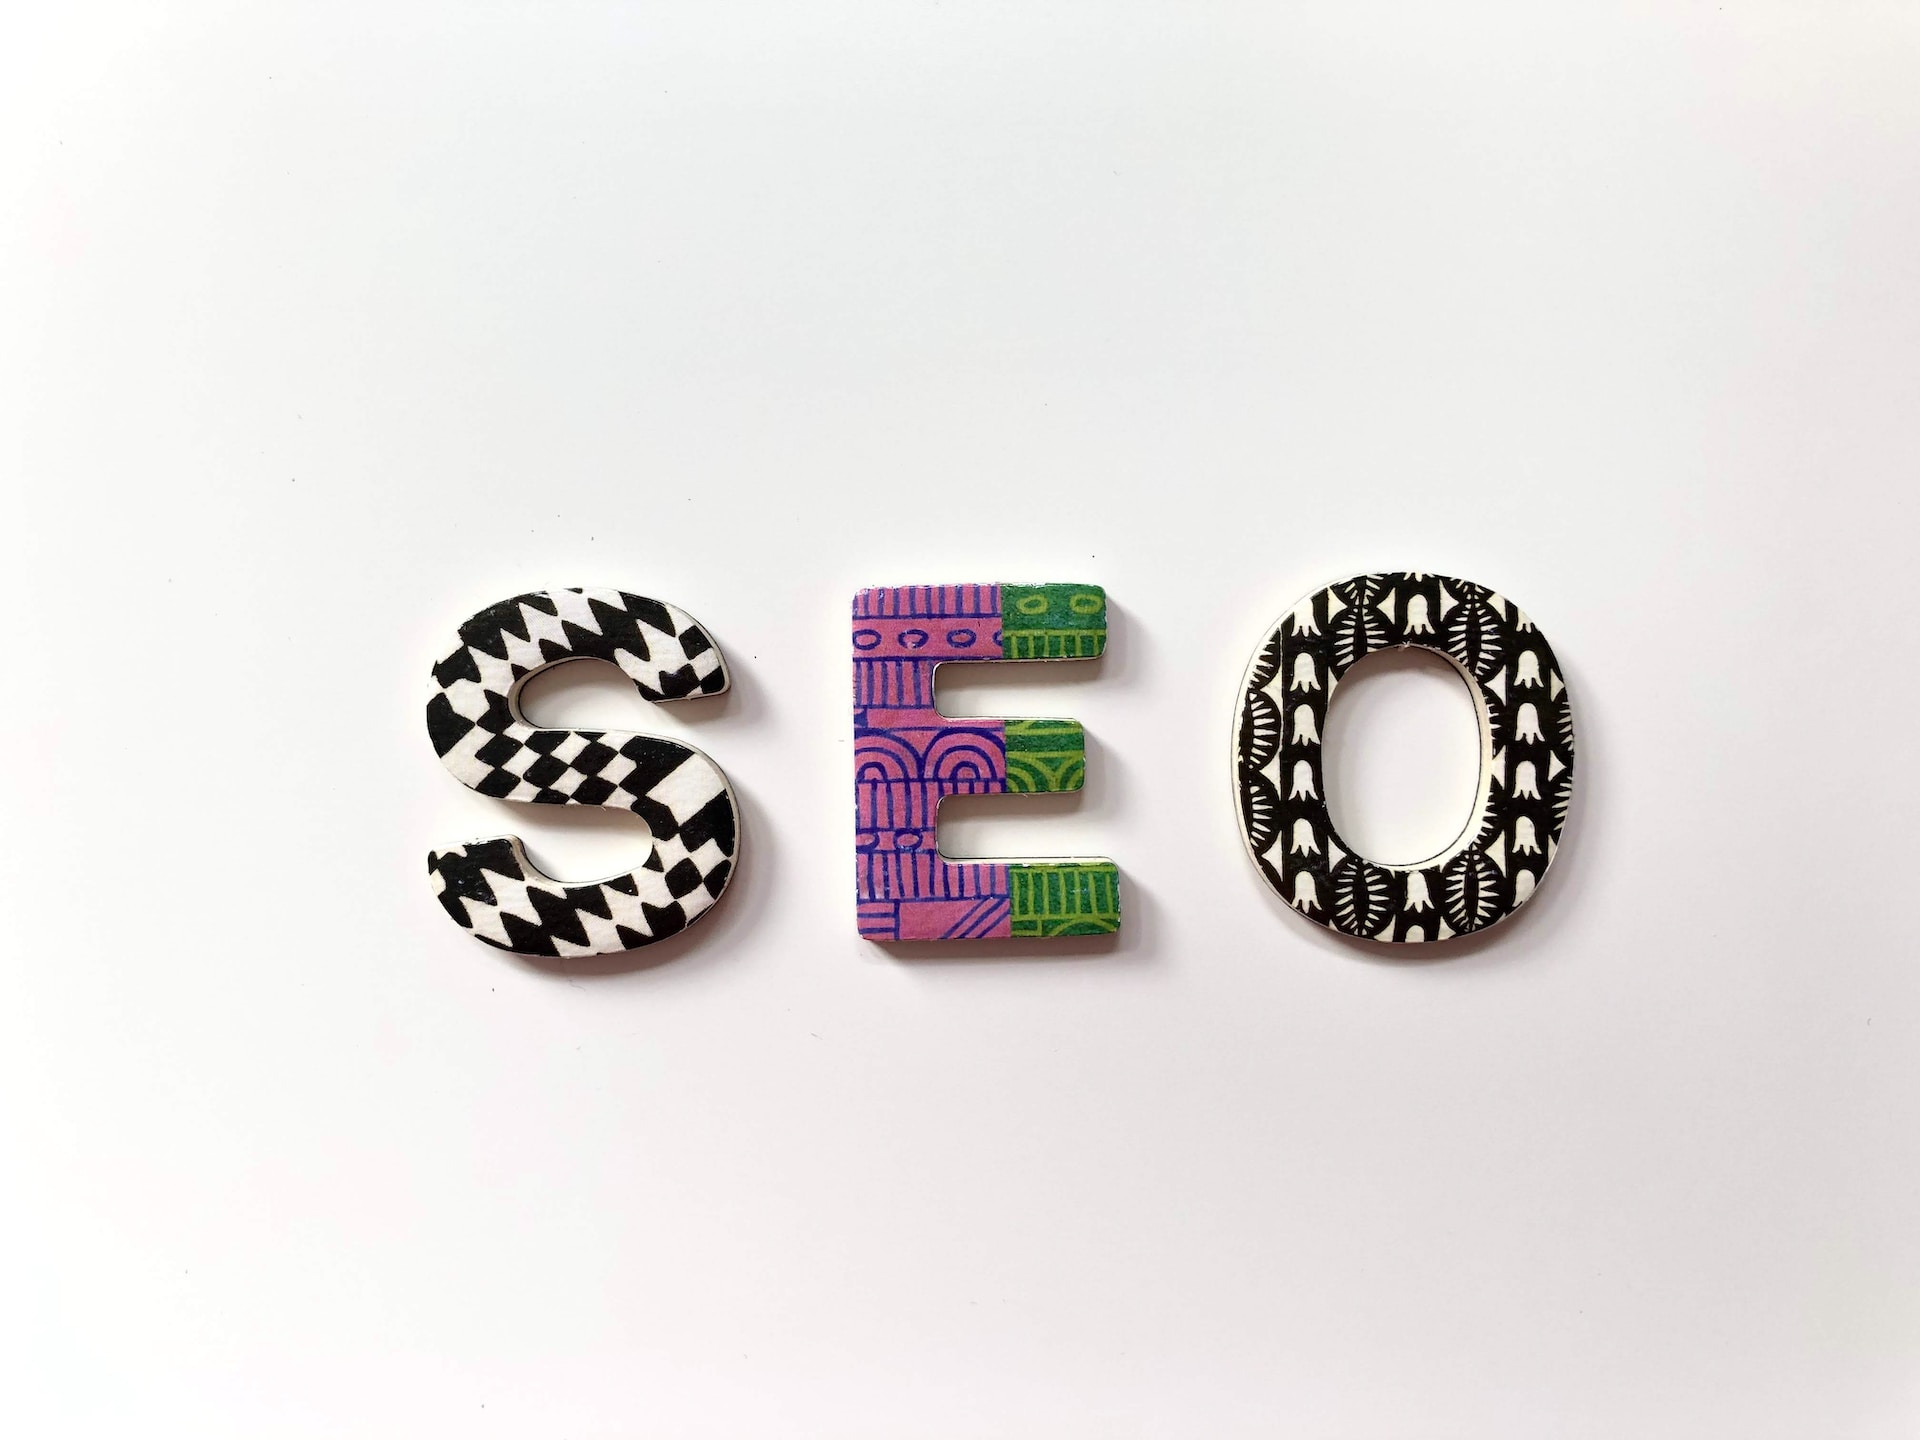 Colorful clay letters spelling "SEO" representing the power and meaning of search engine optimization.